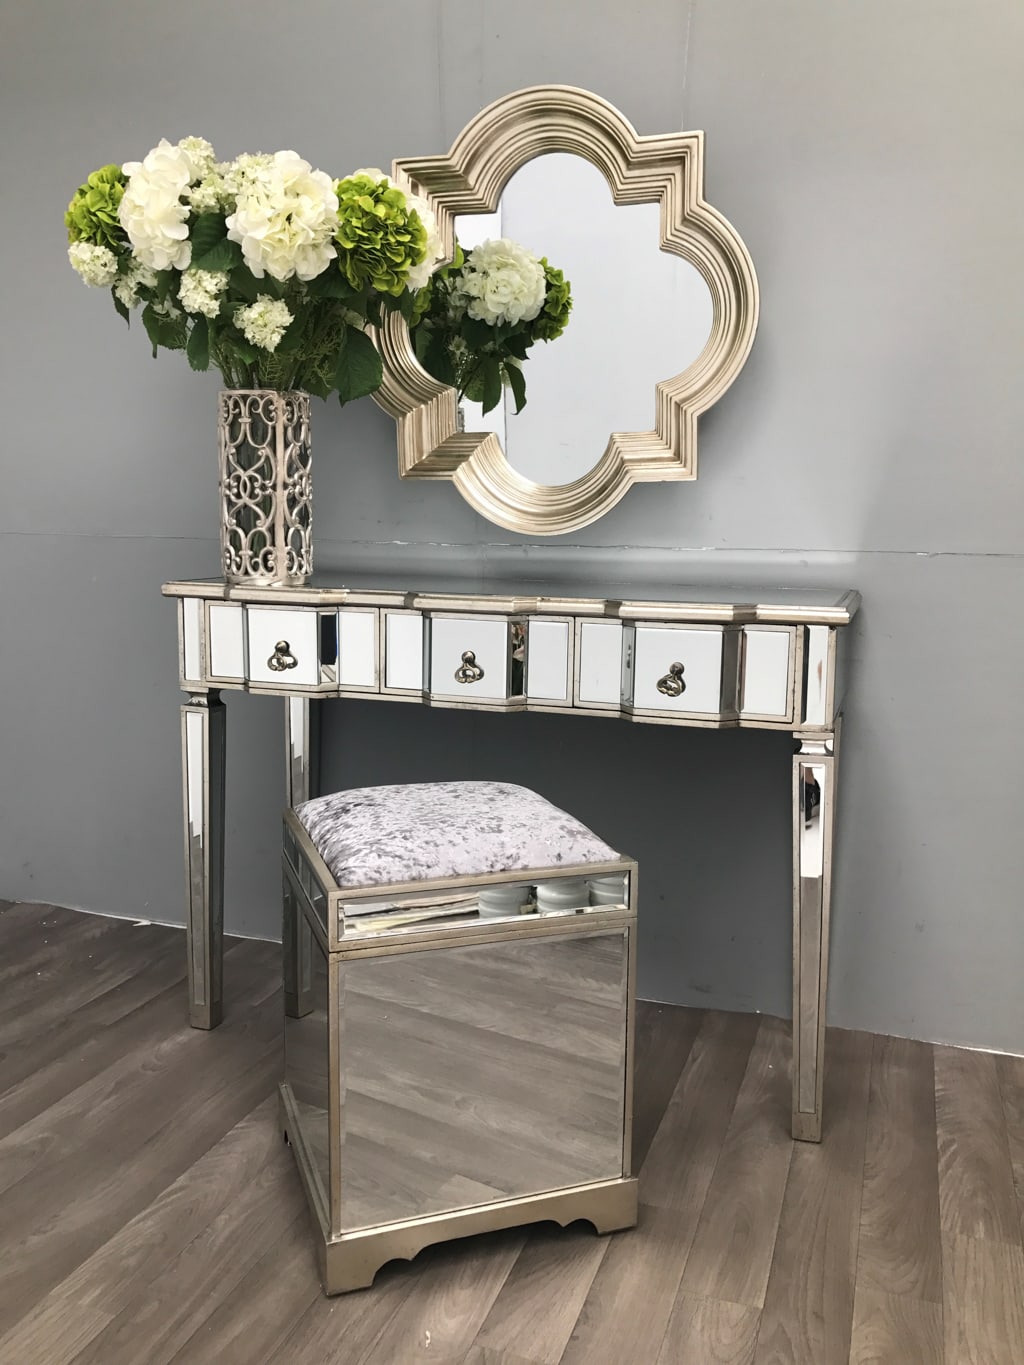 Mirrored STOOL For DRESSING Table - Luxury Modern Finish Hollywood